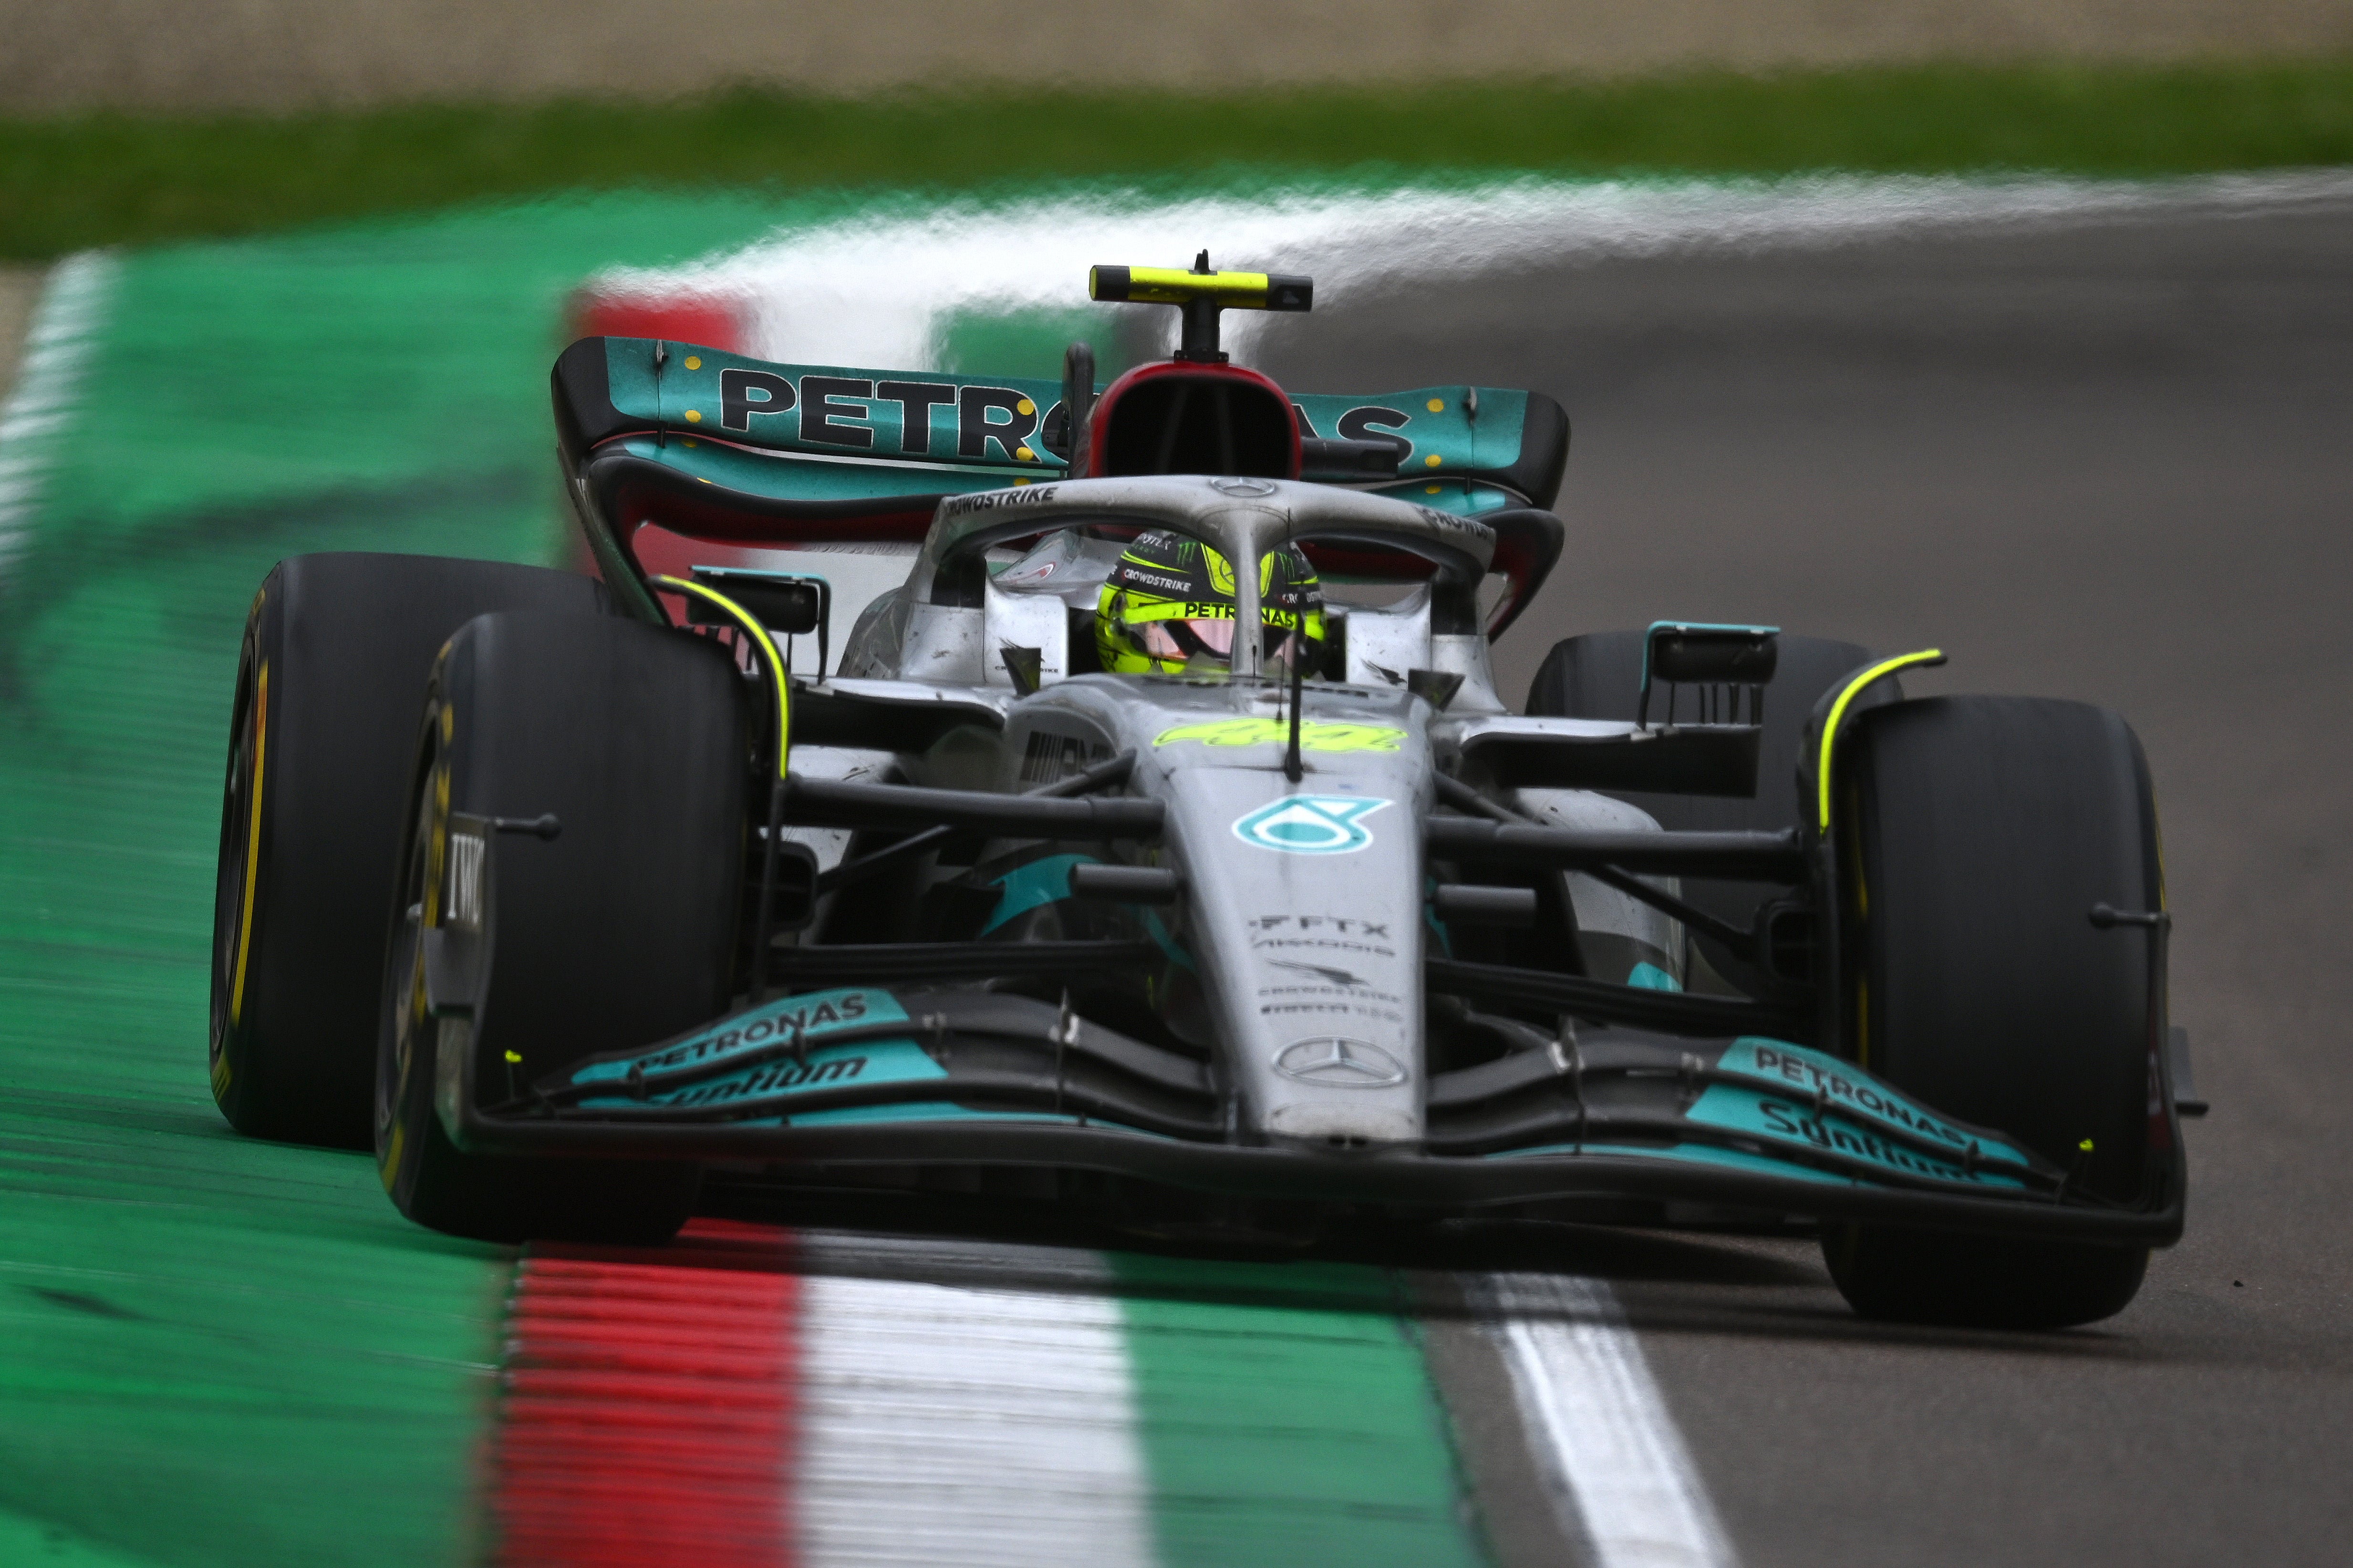 Lewis Hamilton could finish only 13th on a tough weekend at Imola